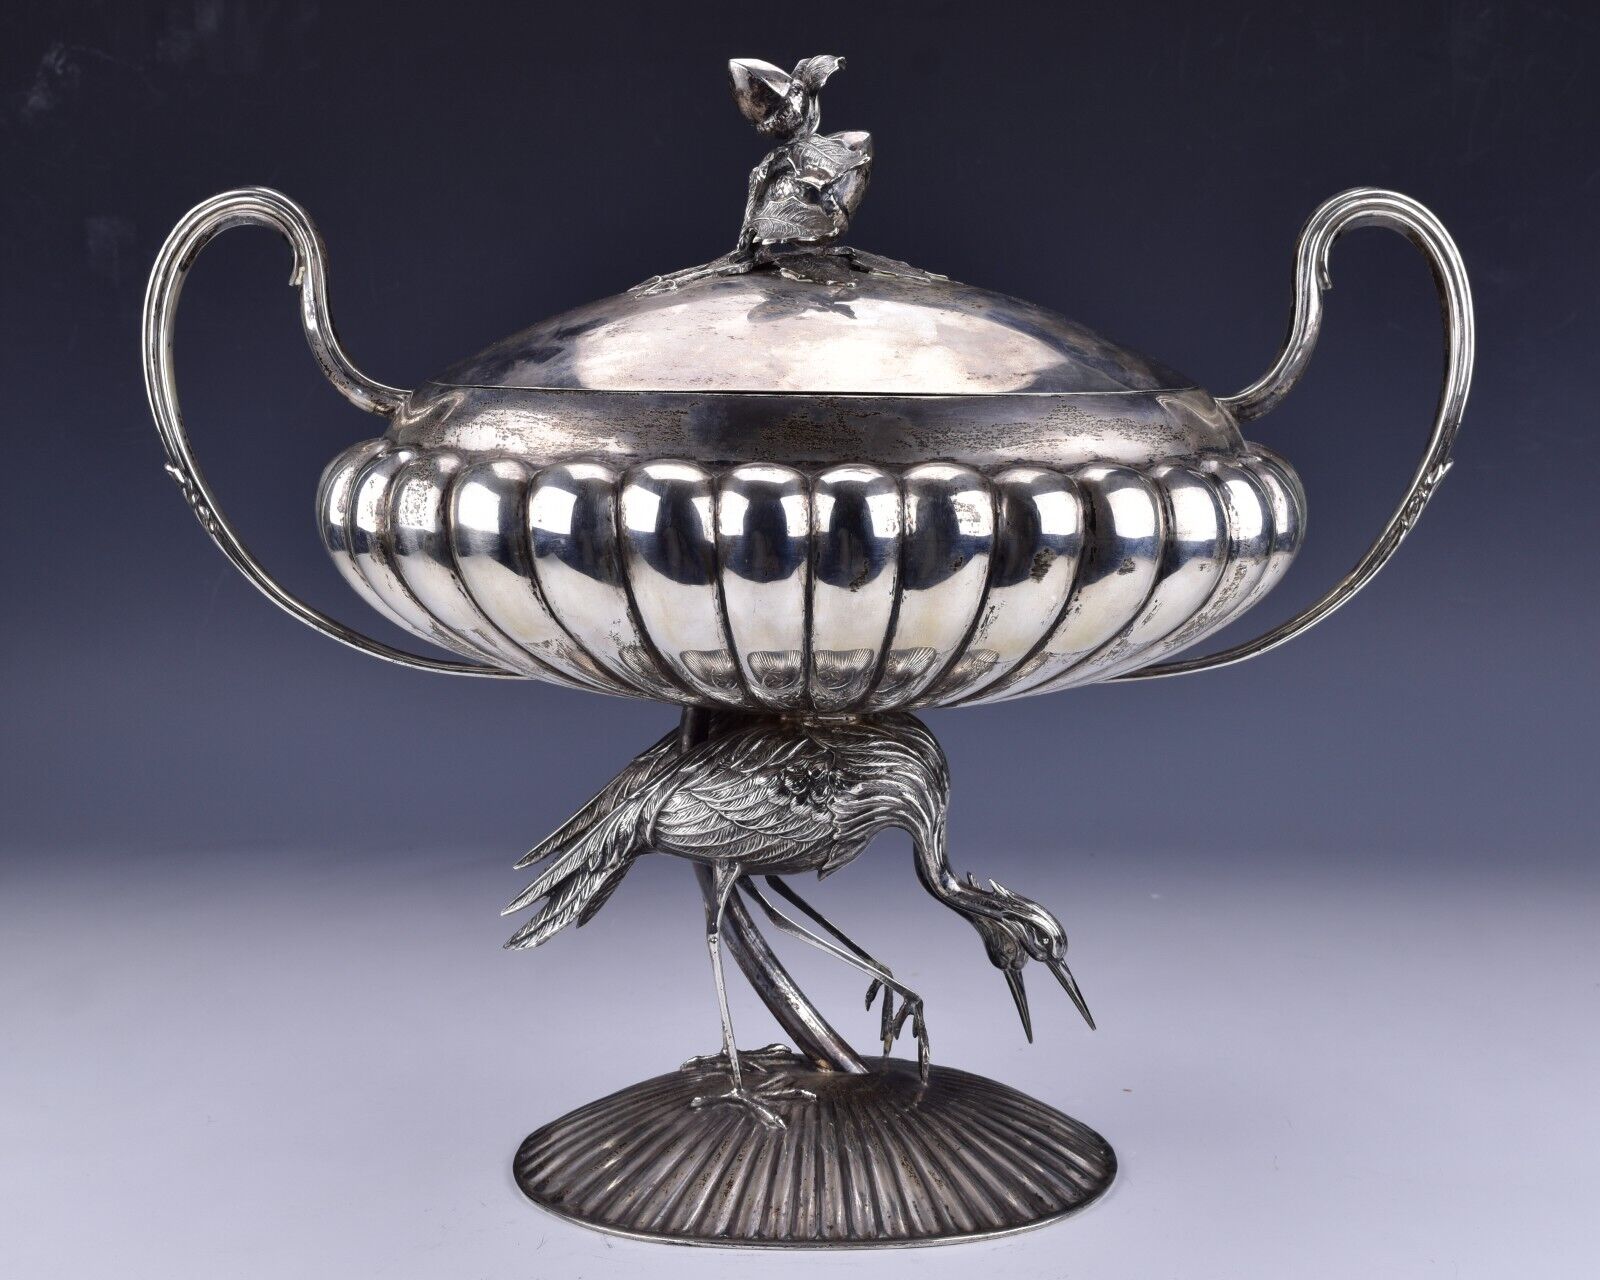 Pasgorcy Spanish Sterling Silver Tureen With Figural Cranes 48 Troy Oz